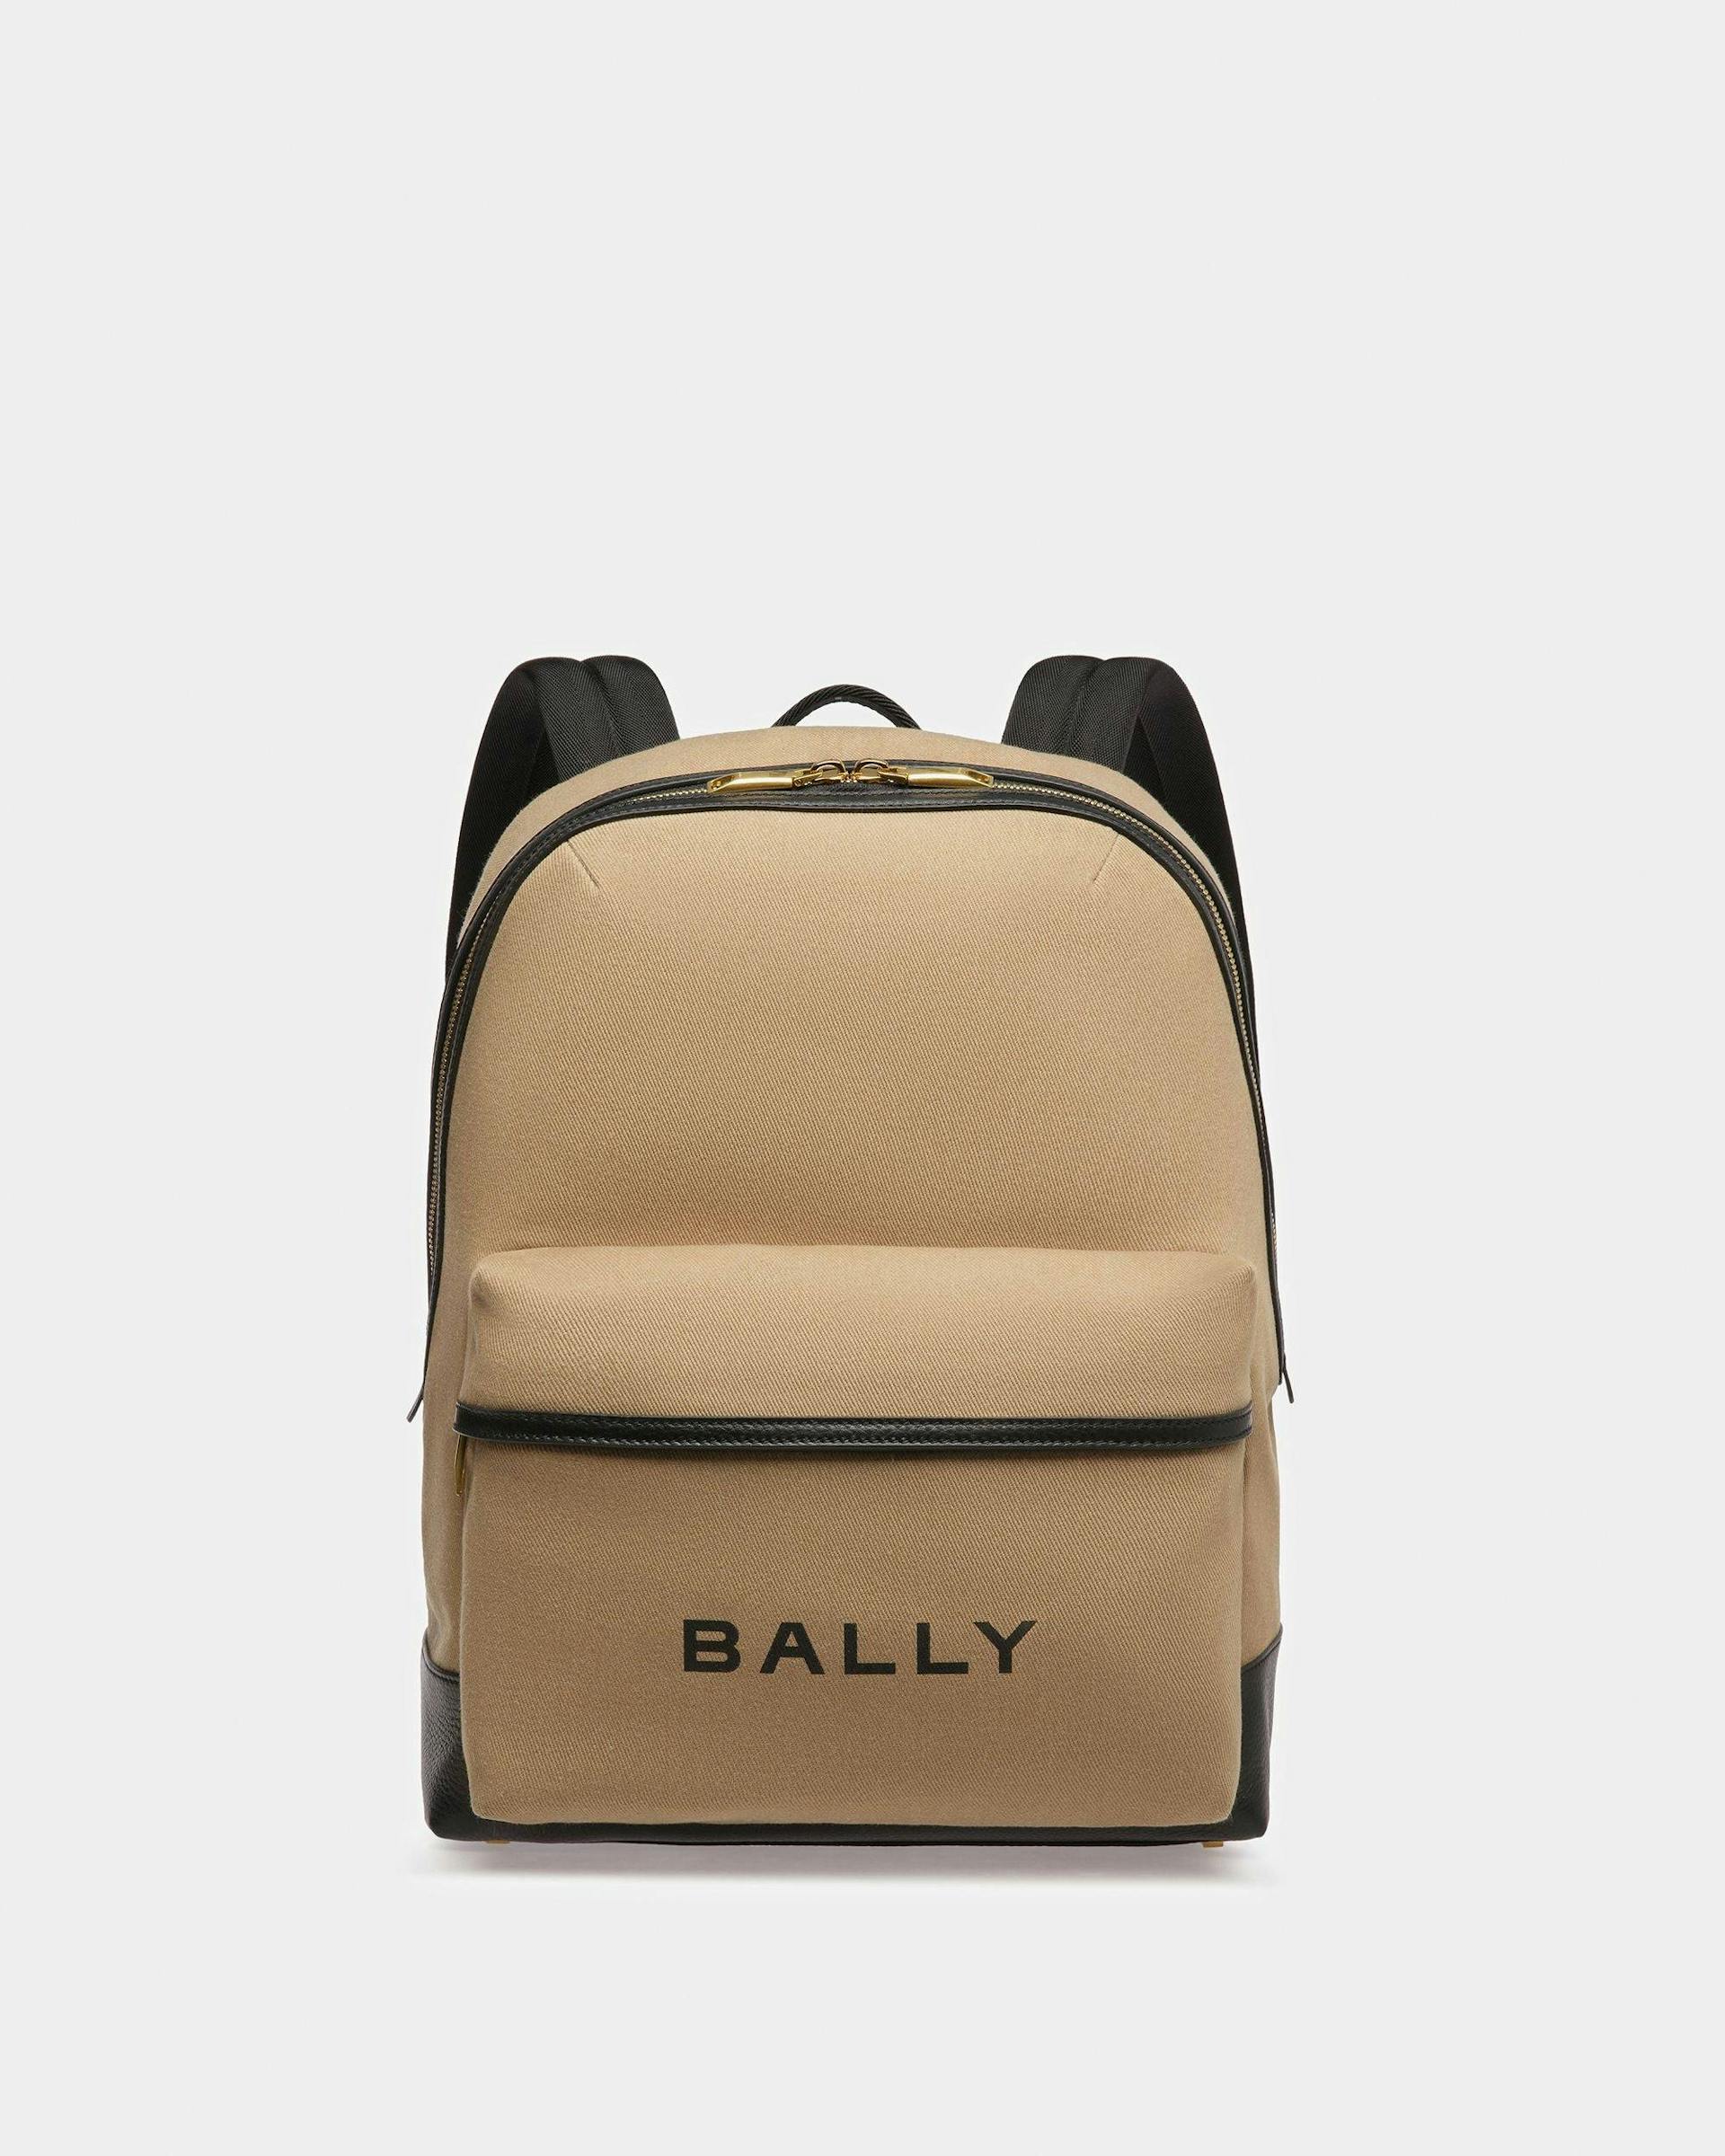 Bar Backpack In Sand And Black Fabric And Leather - Men's - Bally - 01